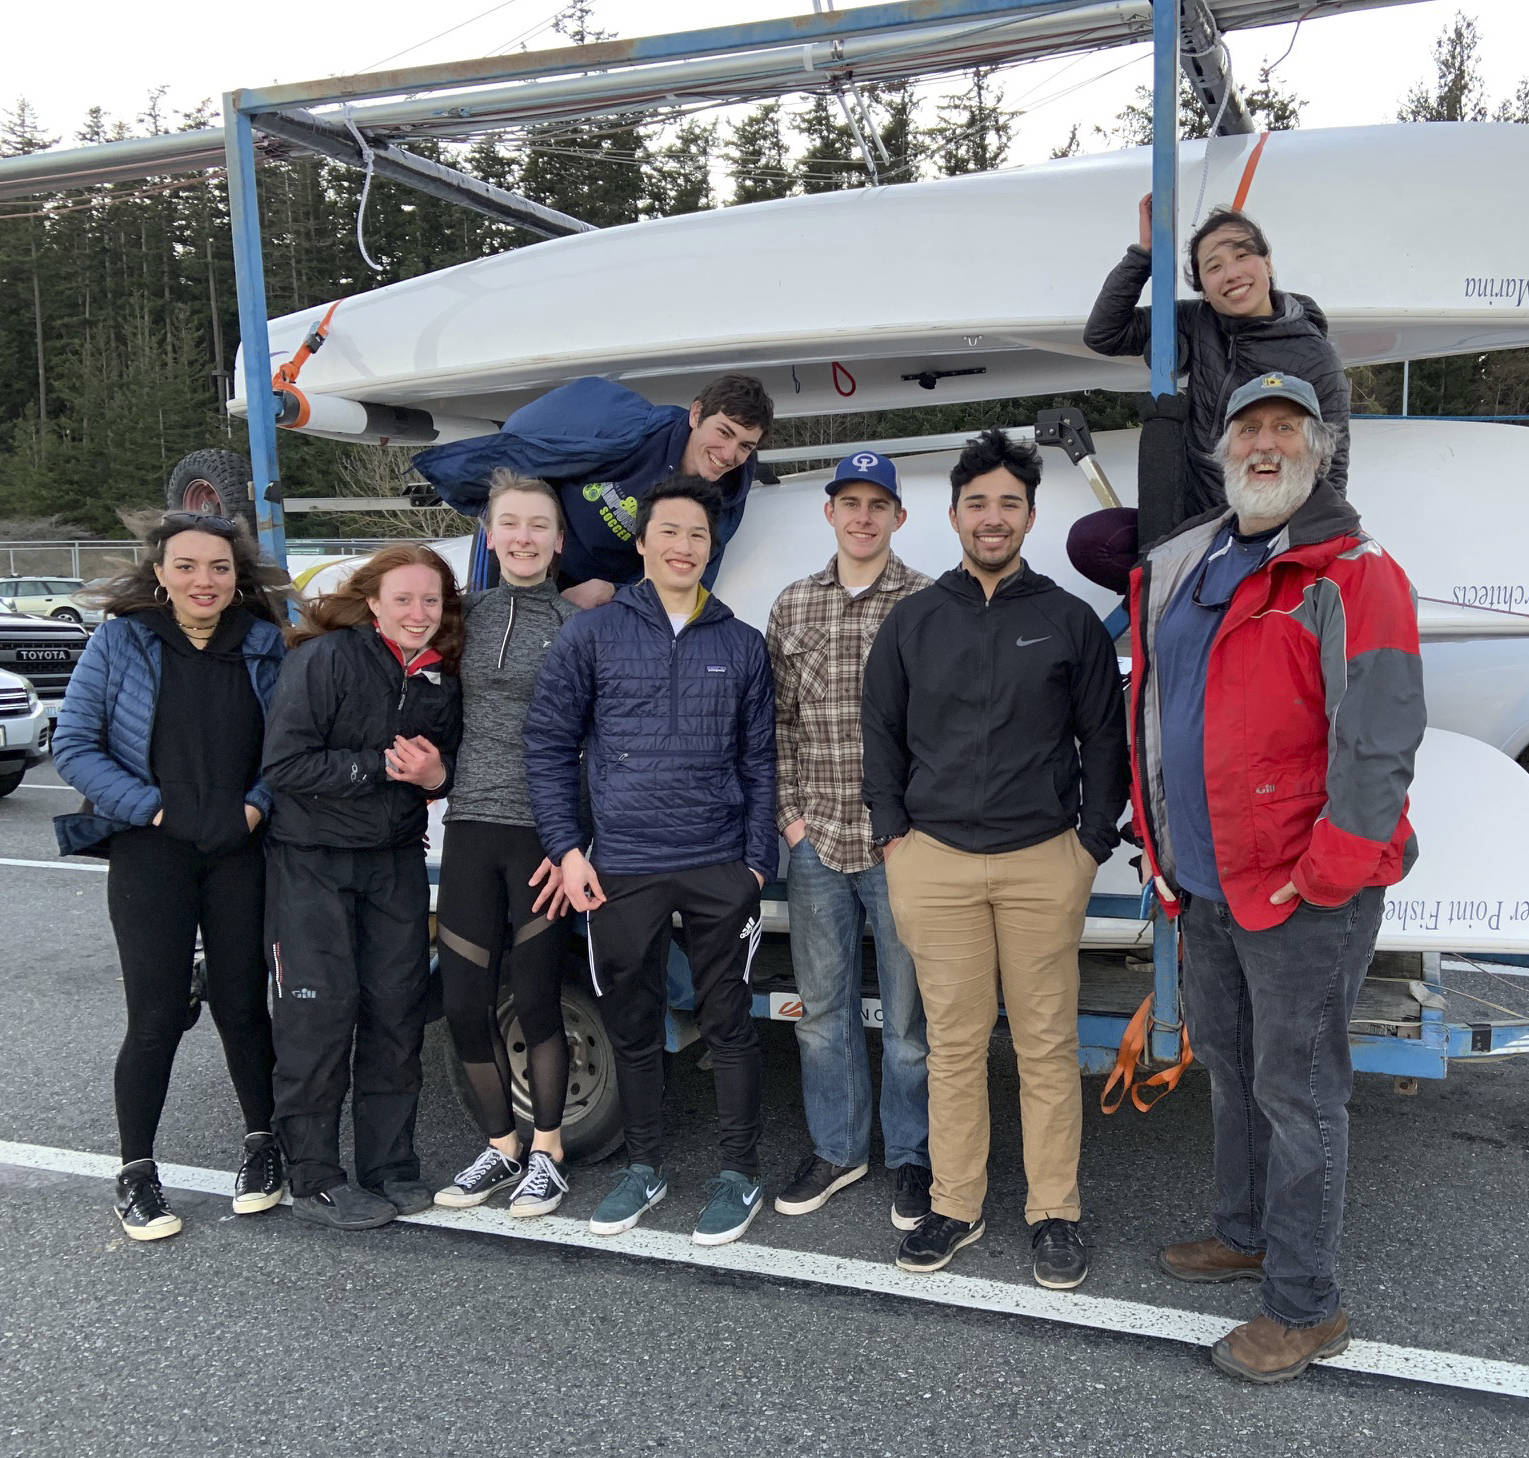 Contributed photo                                The Orcas High School sailing team after their regatta in Anacortes on March 2. They are pictured with coach Burke Thomas.